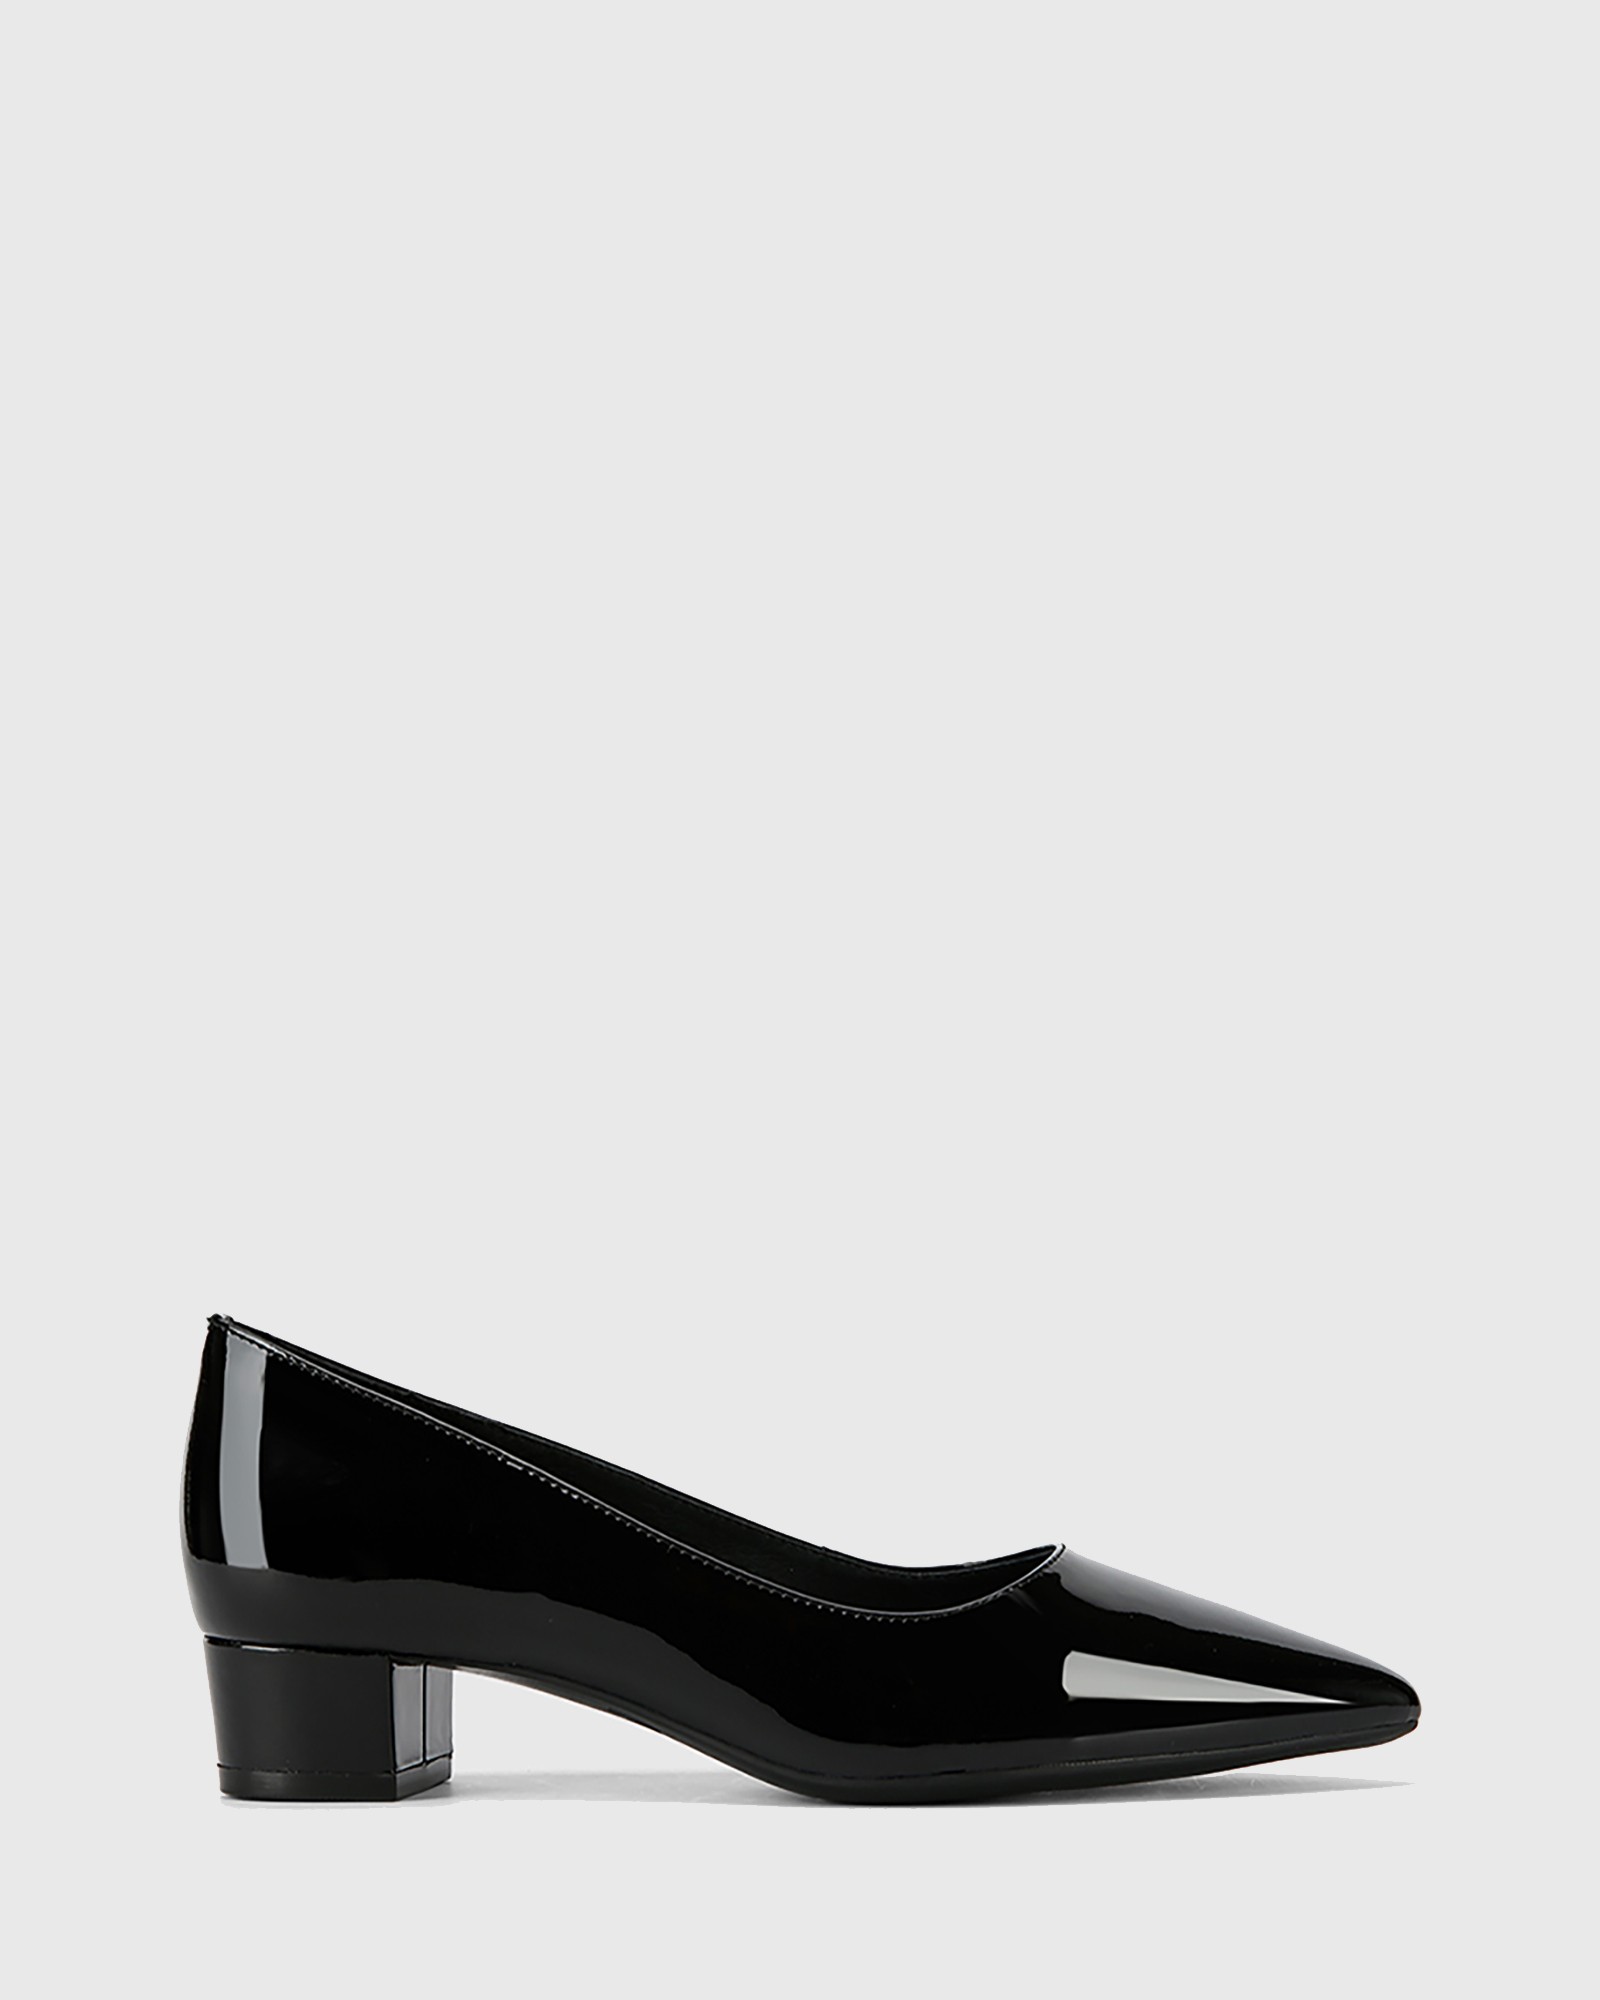 Armin Patent Leather Block Heels Black by Wittner | ShoeSales